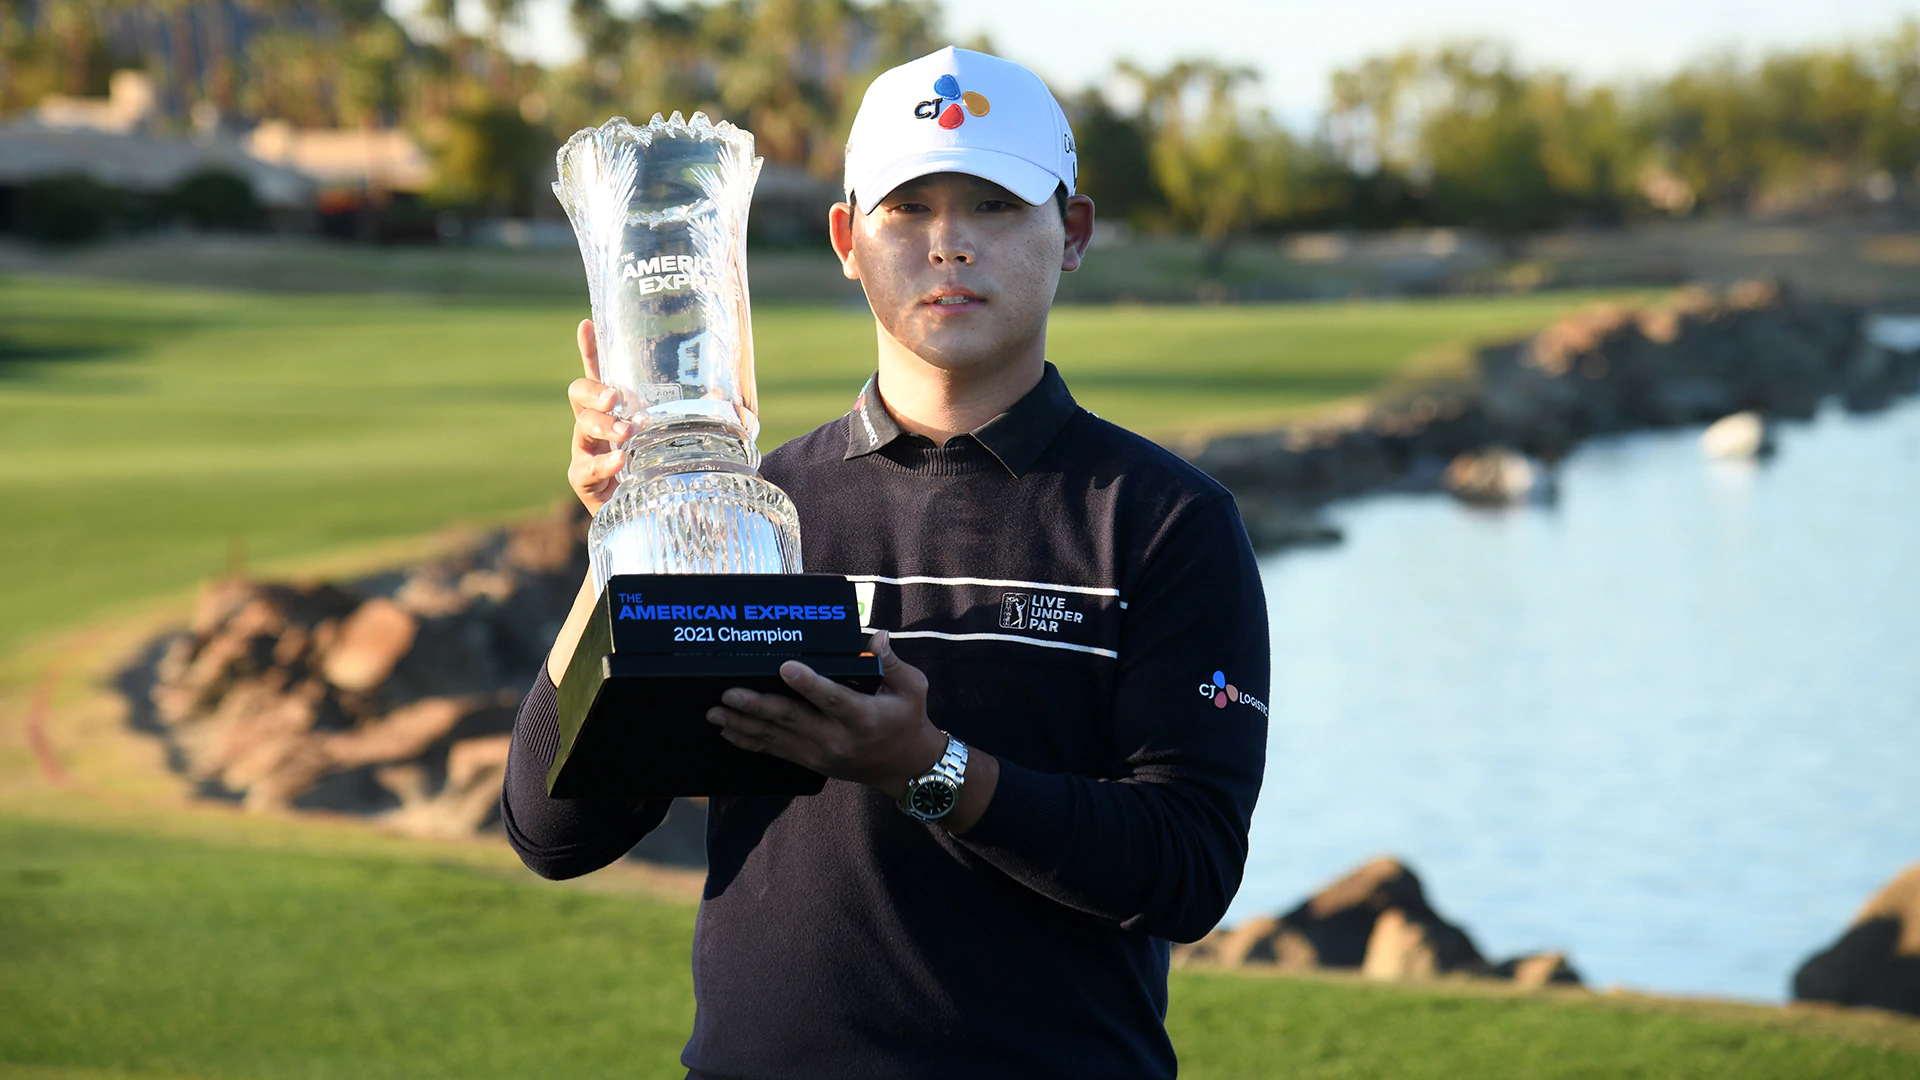 American Express payout: Si Woo Kim collects over $1.2 million